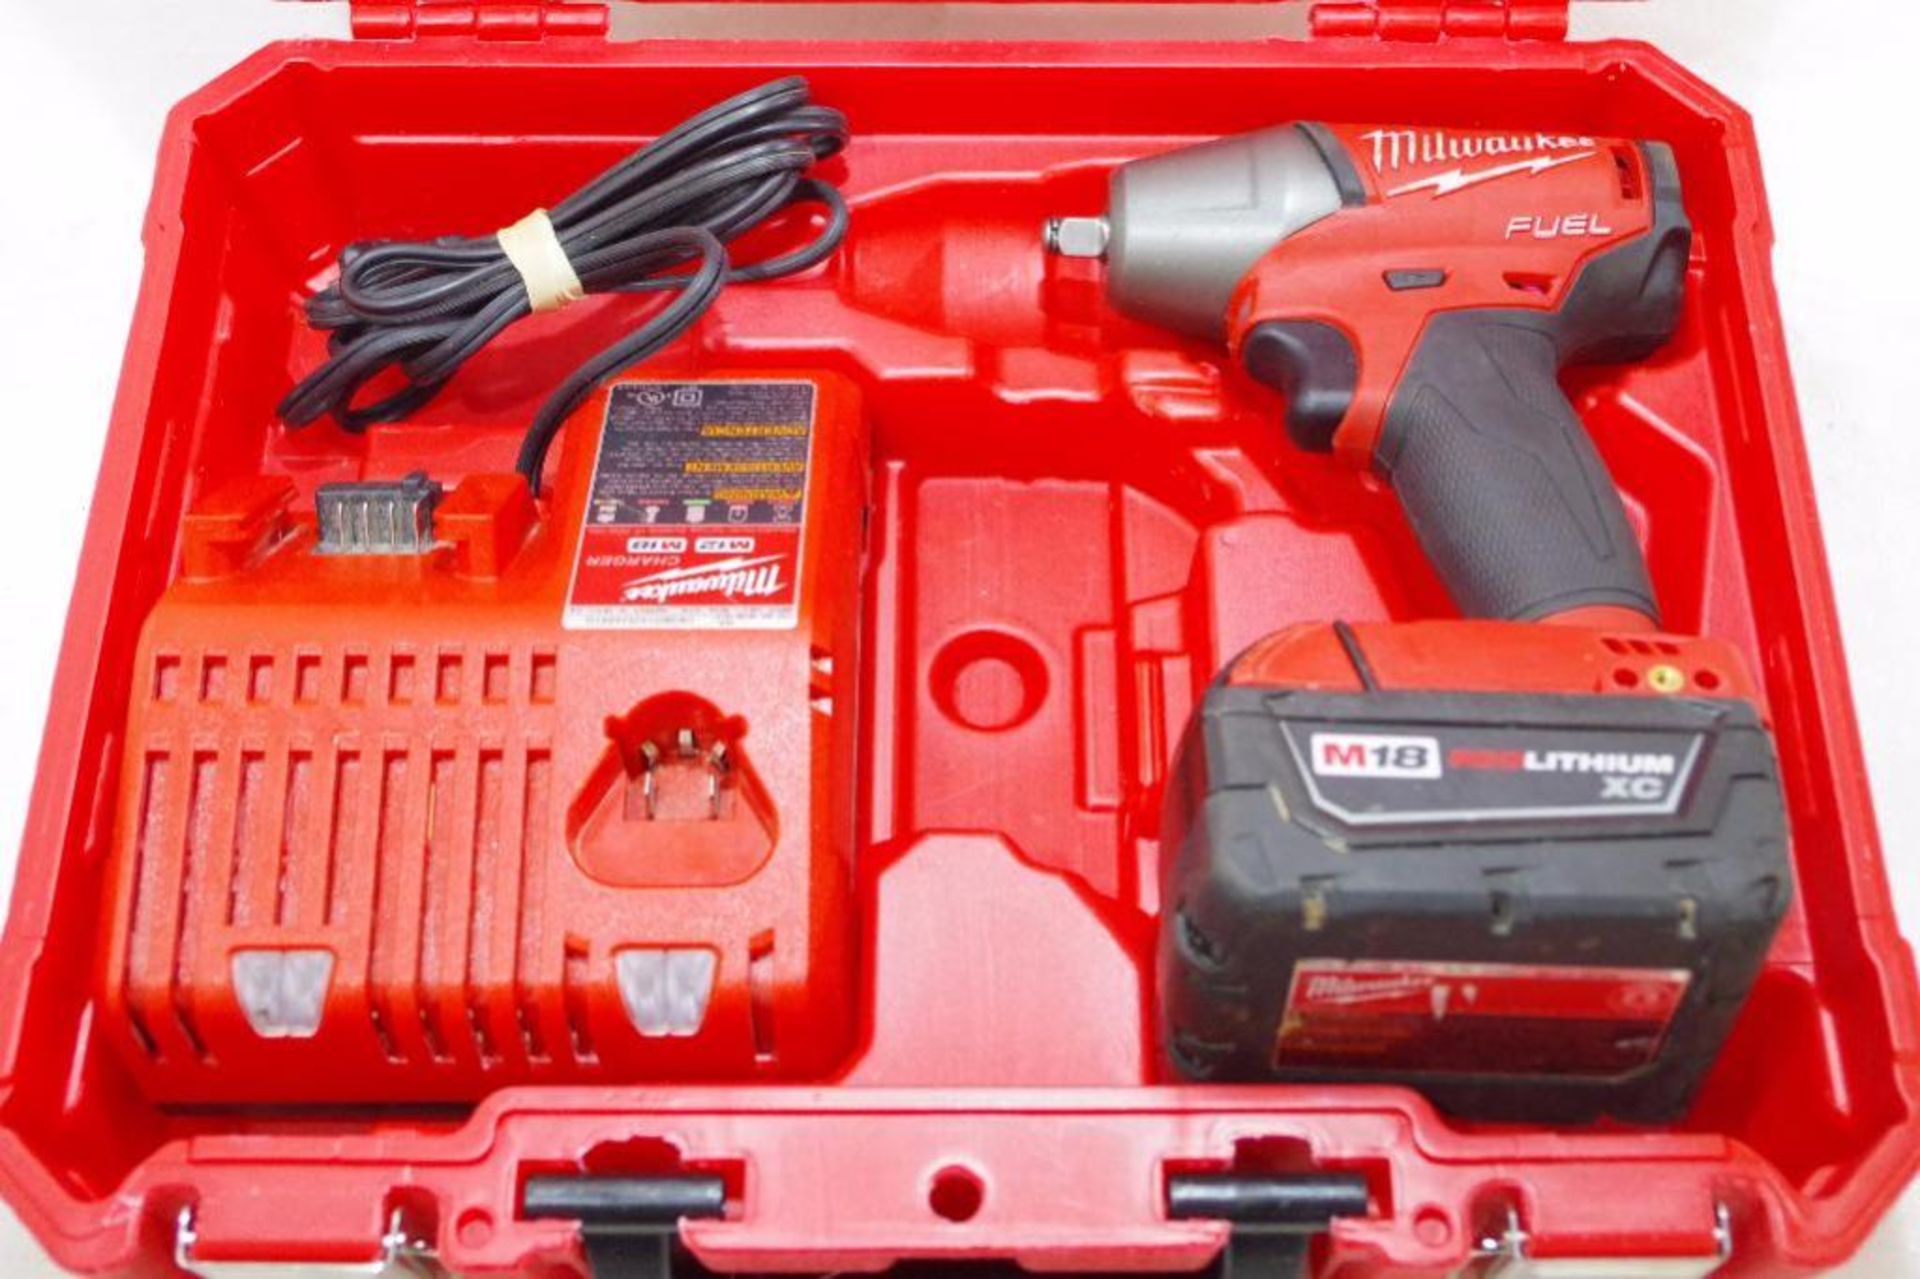 MILWAUKEE FUEL 18V 3/8" Square-Ring Brushless Impact Wrench, (1) Battery, Charger & Case